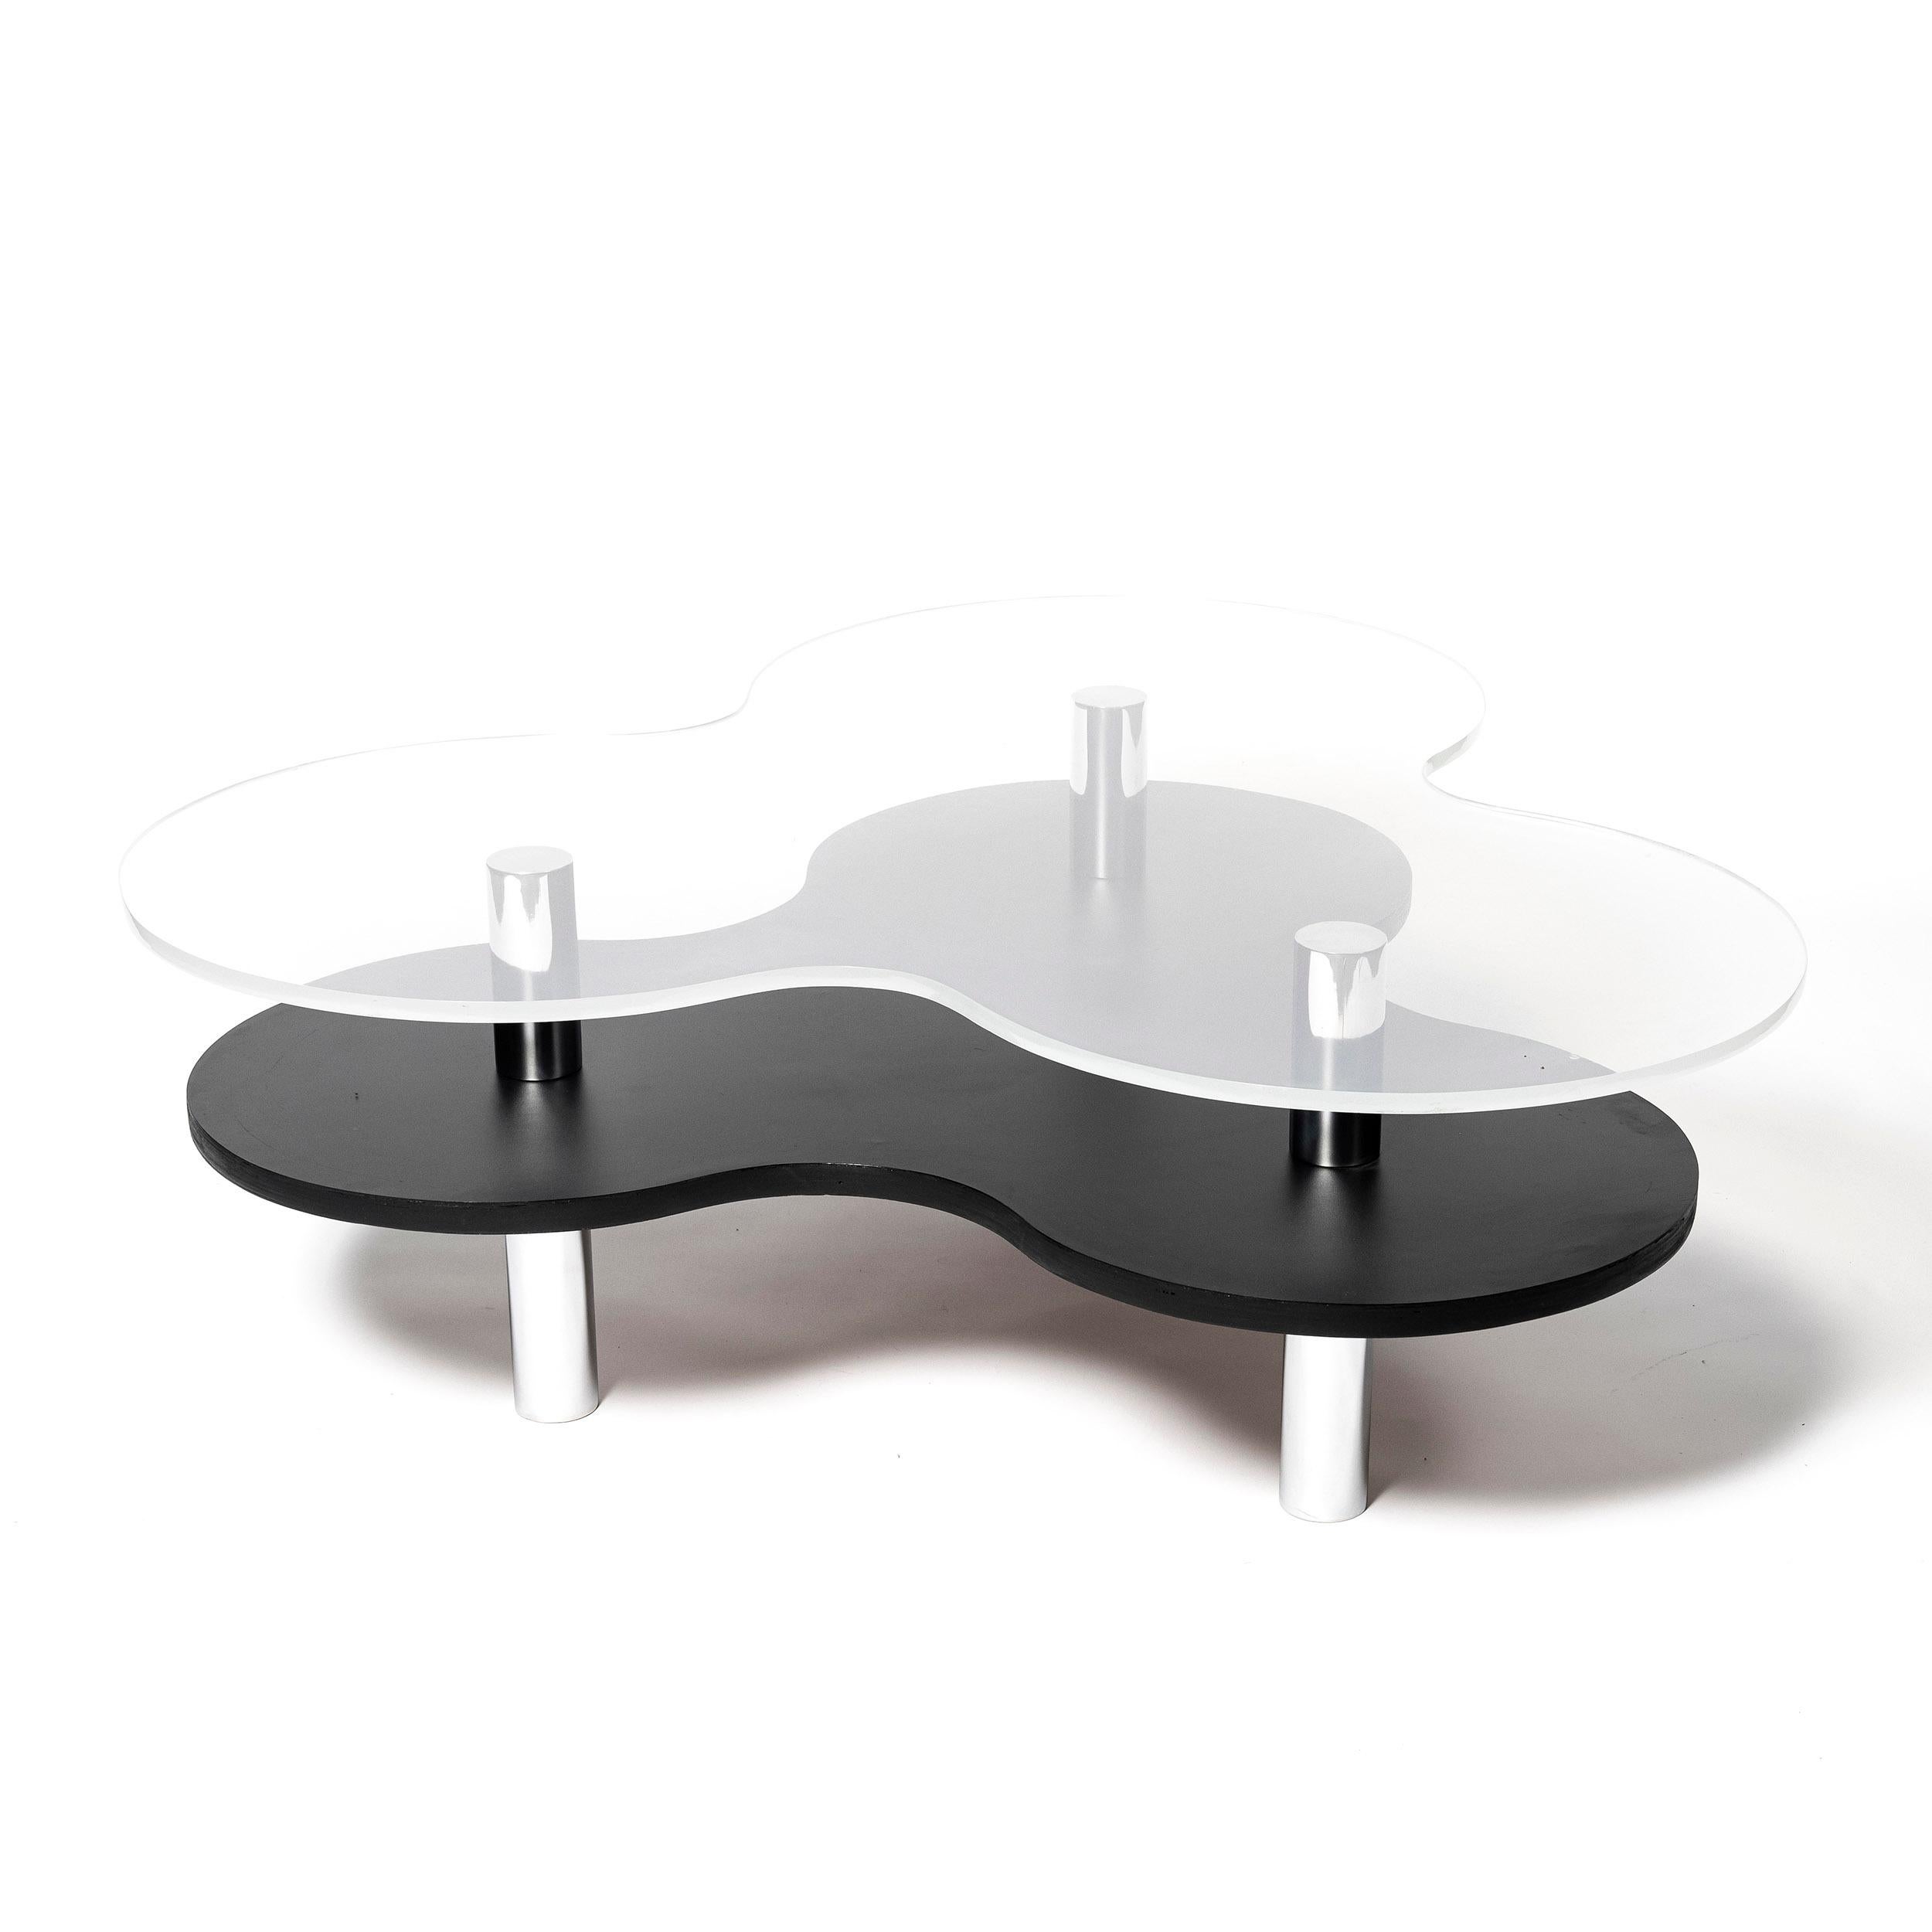 Wood, formica, acrylic and chrome metal low table, Italy circa 1980.

Acrylic: 1,5 cm thick.